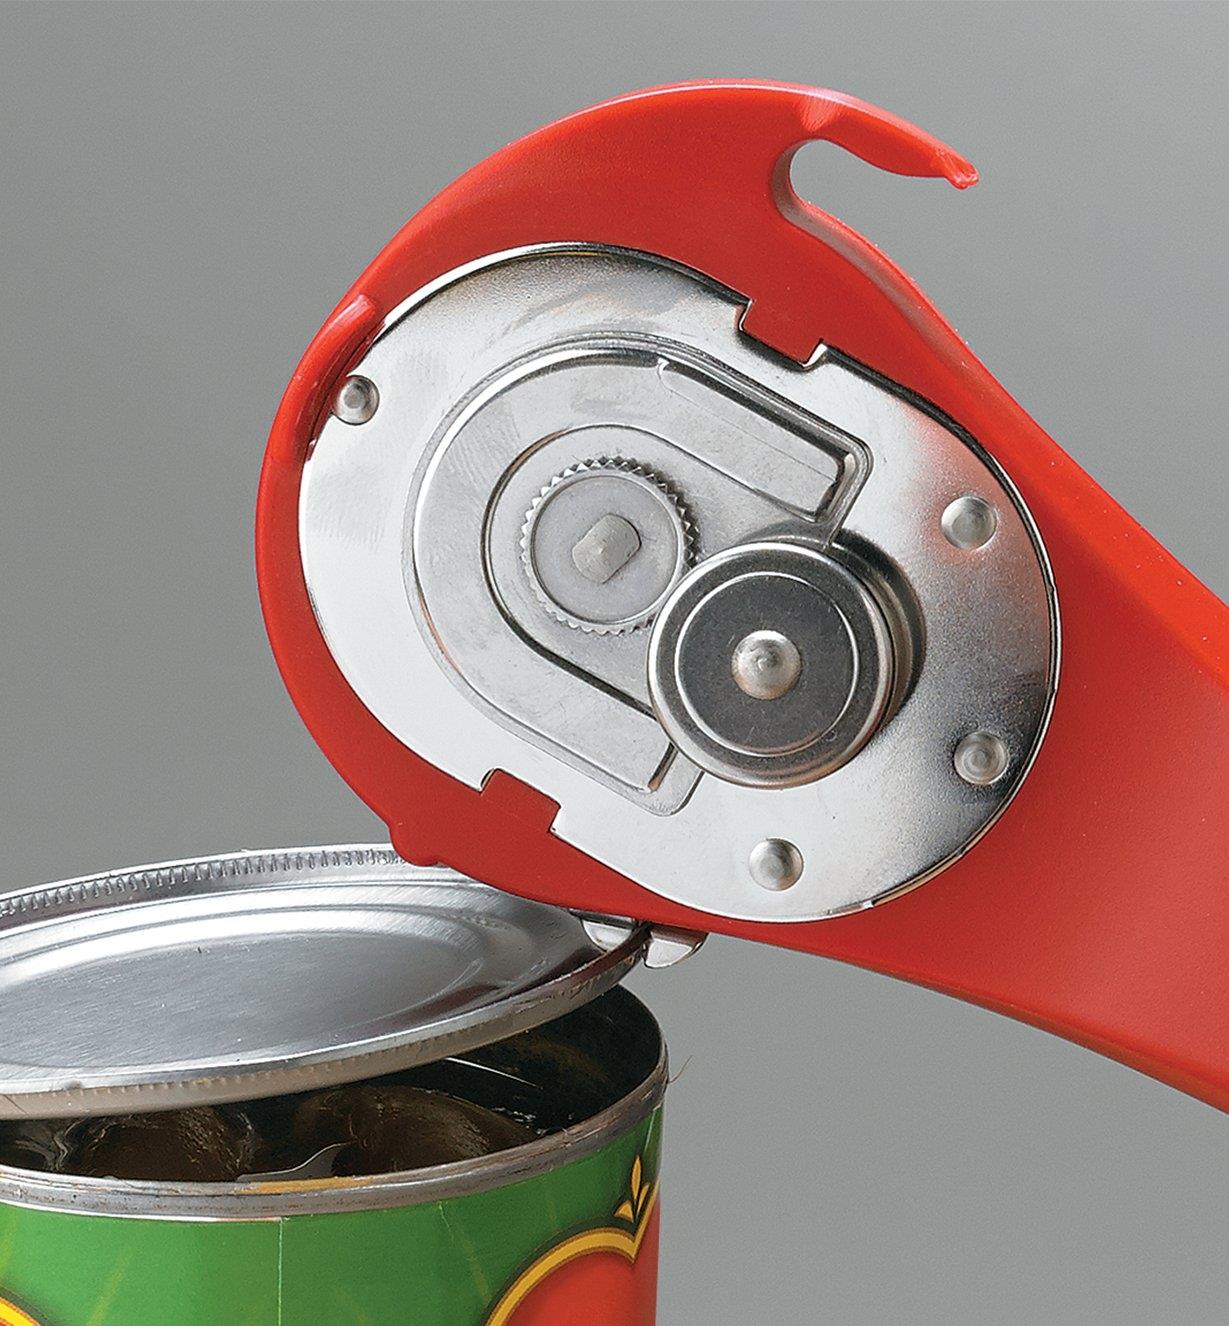 Using the pincers on the side of the can opener to lift the lid off a can